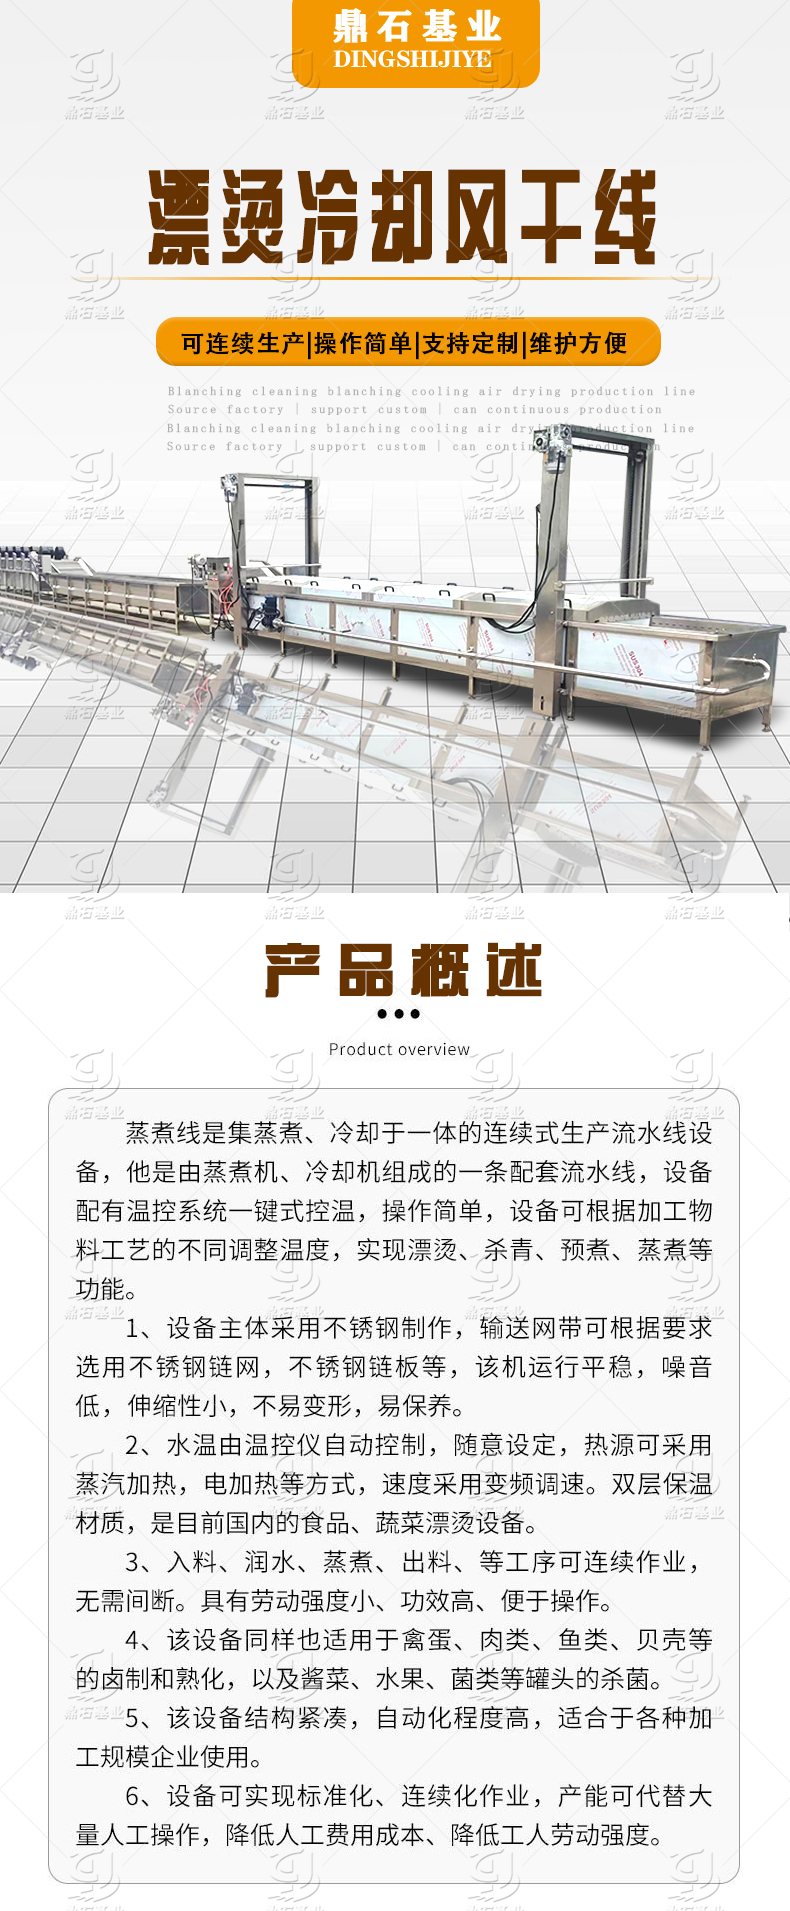 New Sweet Corn Production Line Glutinous Corn Stick Bleaching and scalding Equipment Seafood Pre cooking Machine